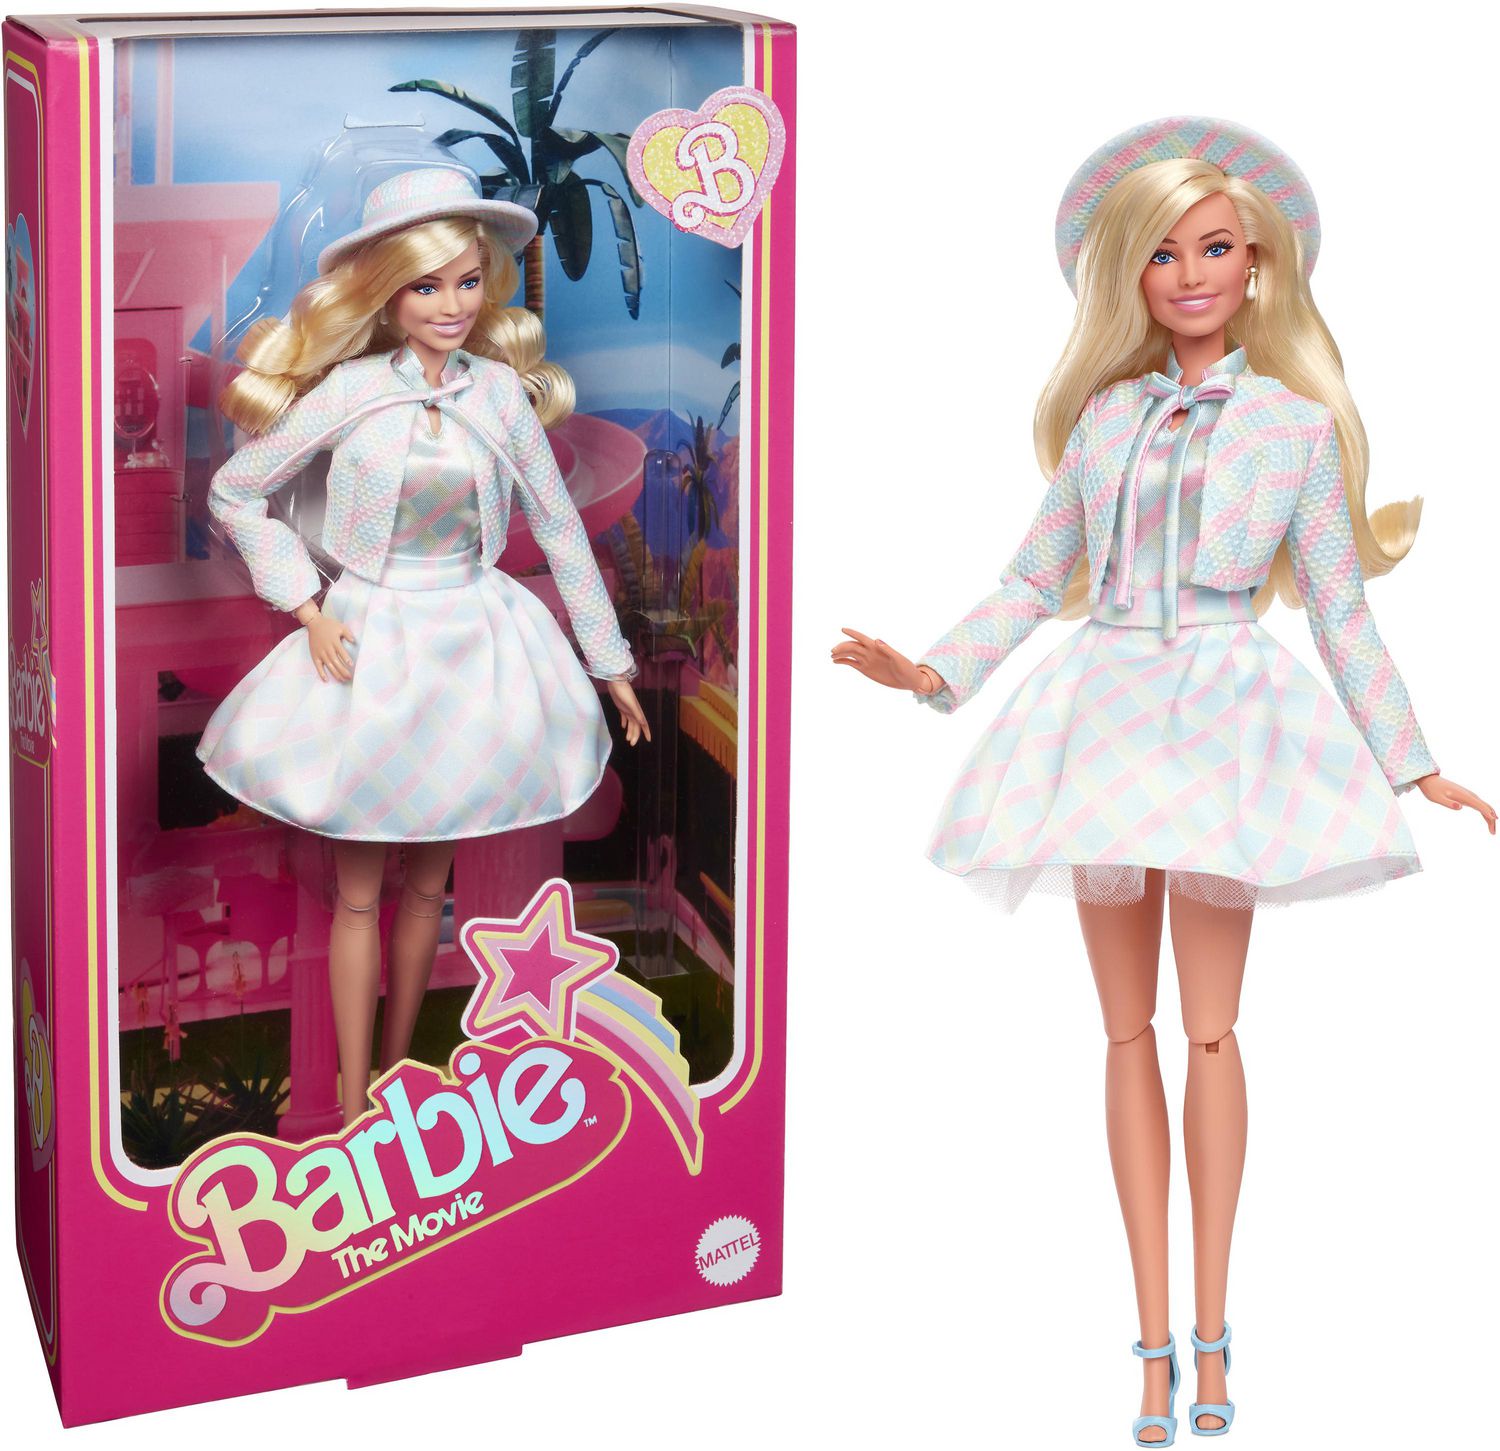 Barbie The Movie Doll, Margot Robbie as Barbie, Collectible Doll